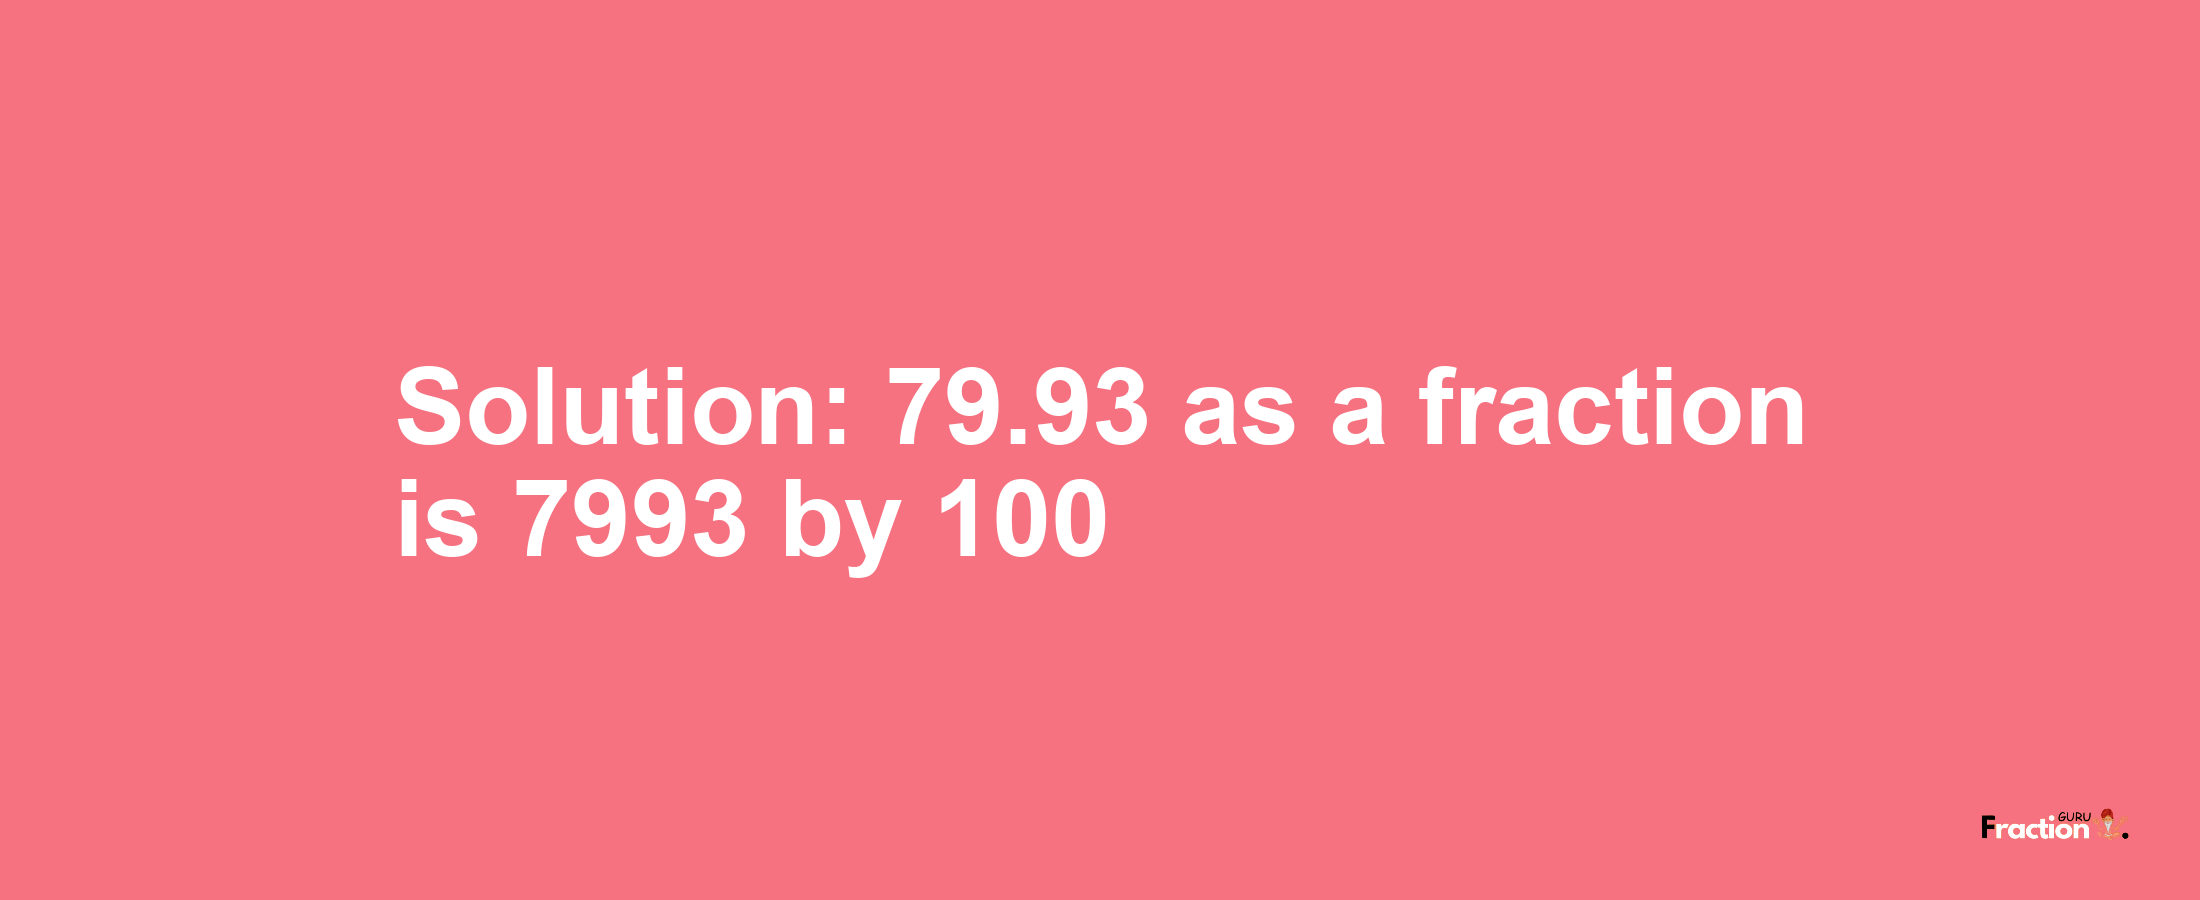 Solution:79.93 as a fraction is 7993/100